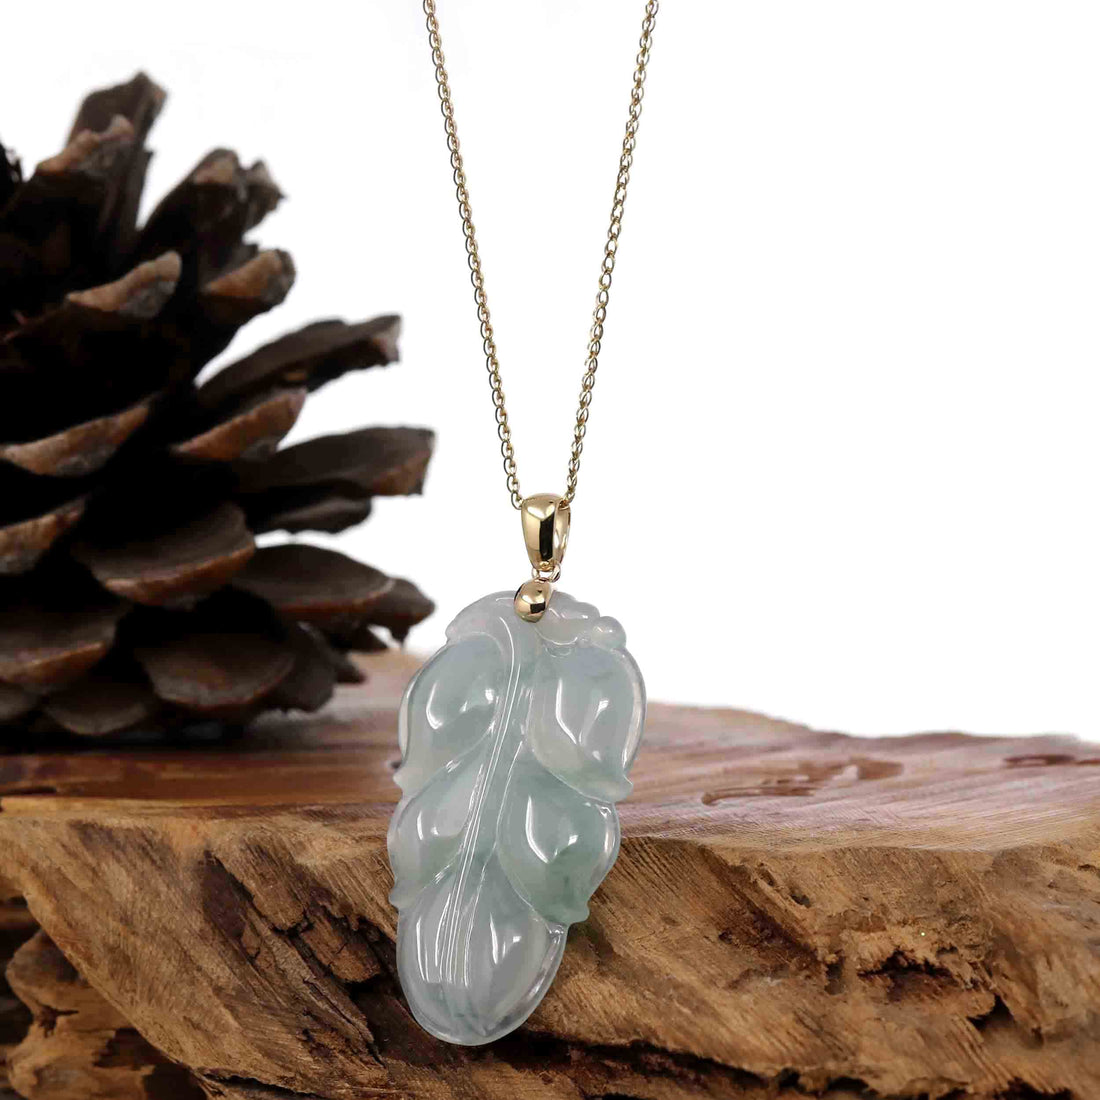 Baikalla Jewelry Jade Guanyin Pendant Necklace Copy of Copy of Copy of Genuine Ice Green Jadeite Jade Jin Zhi Yu Ye (Leaf) Necklace With White Gold Bail